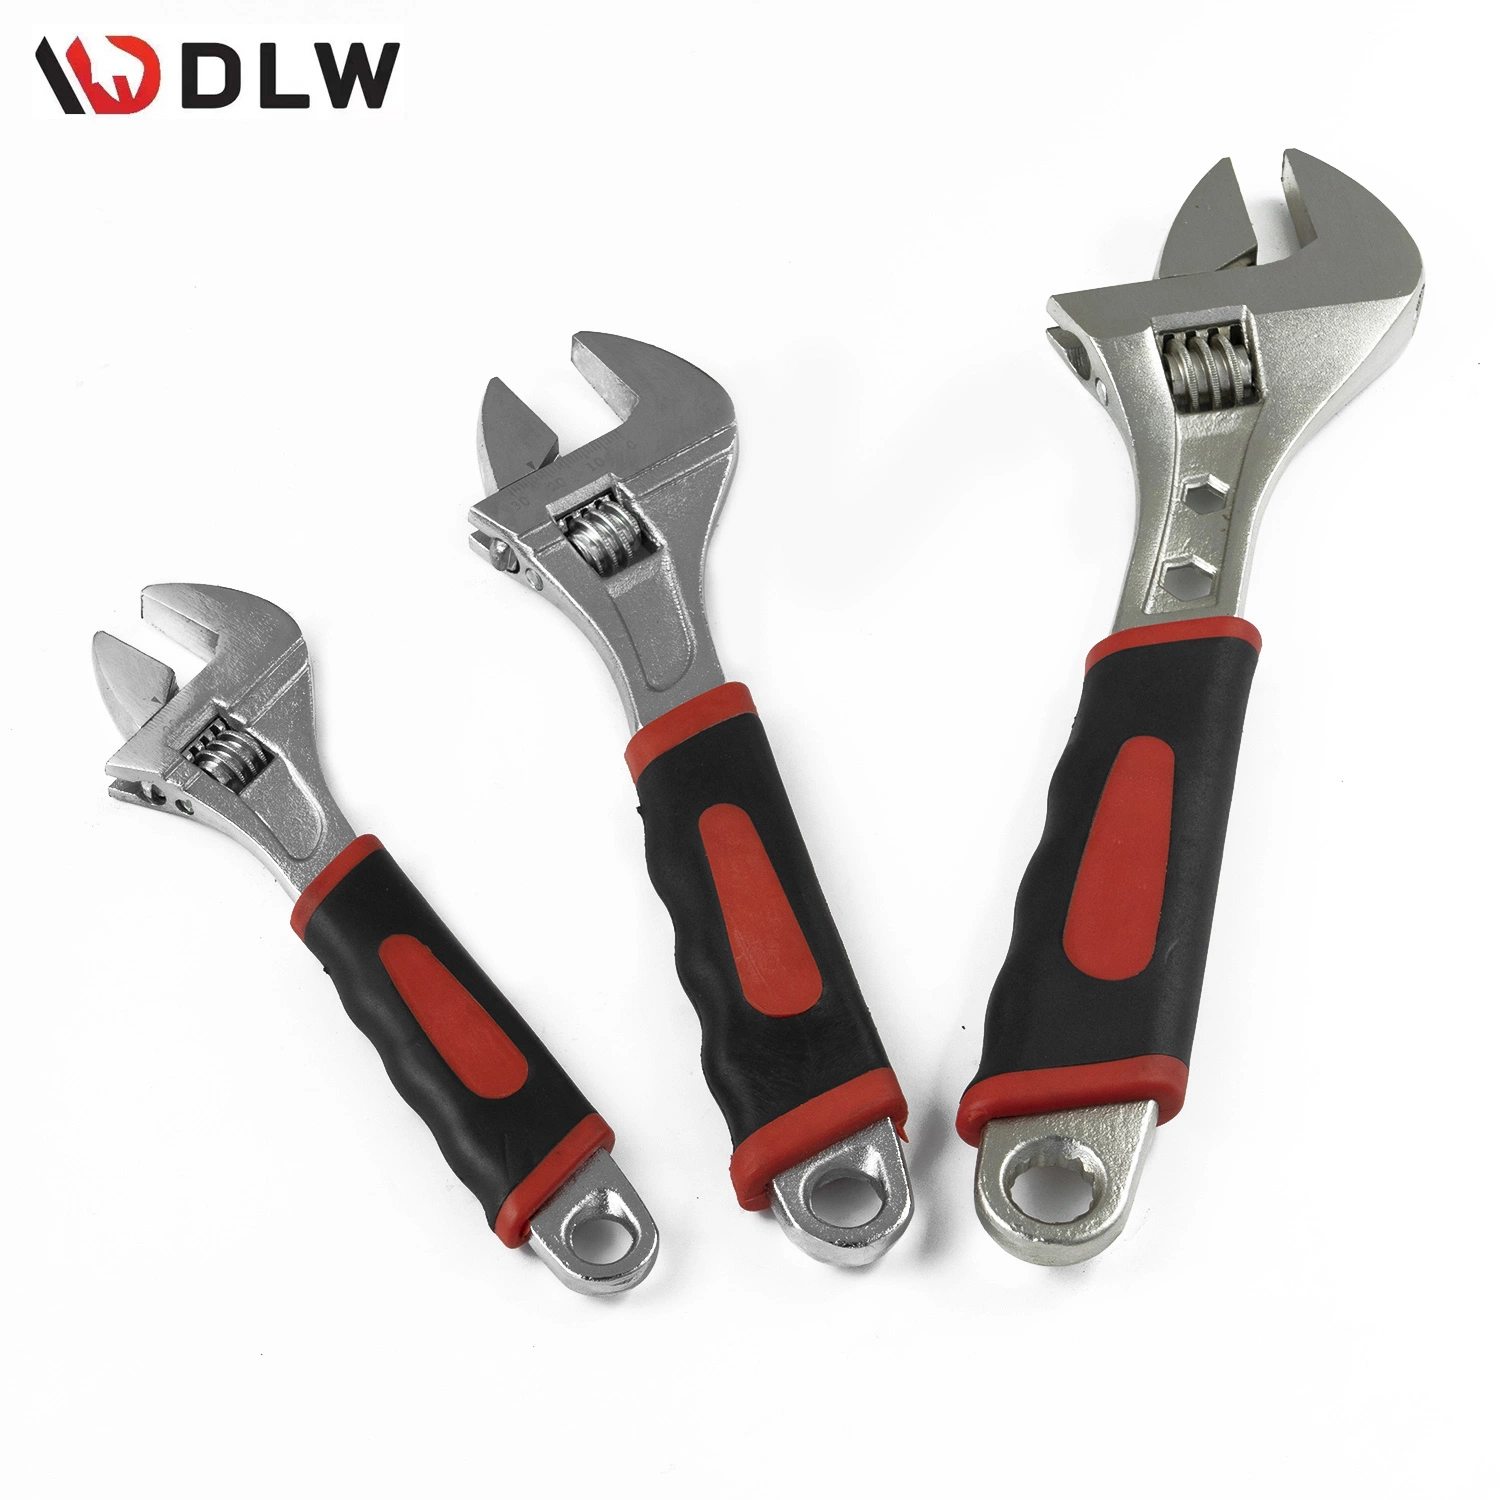 Wholesale Rubber Grip Adjustable Wrench with Multiple Size